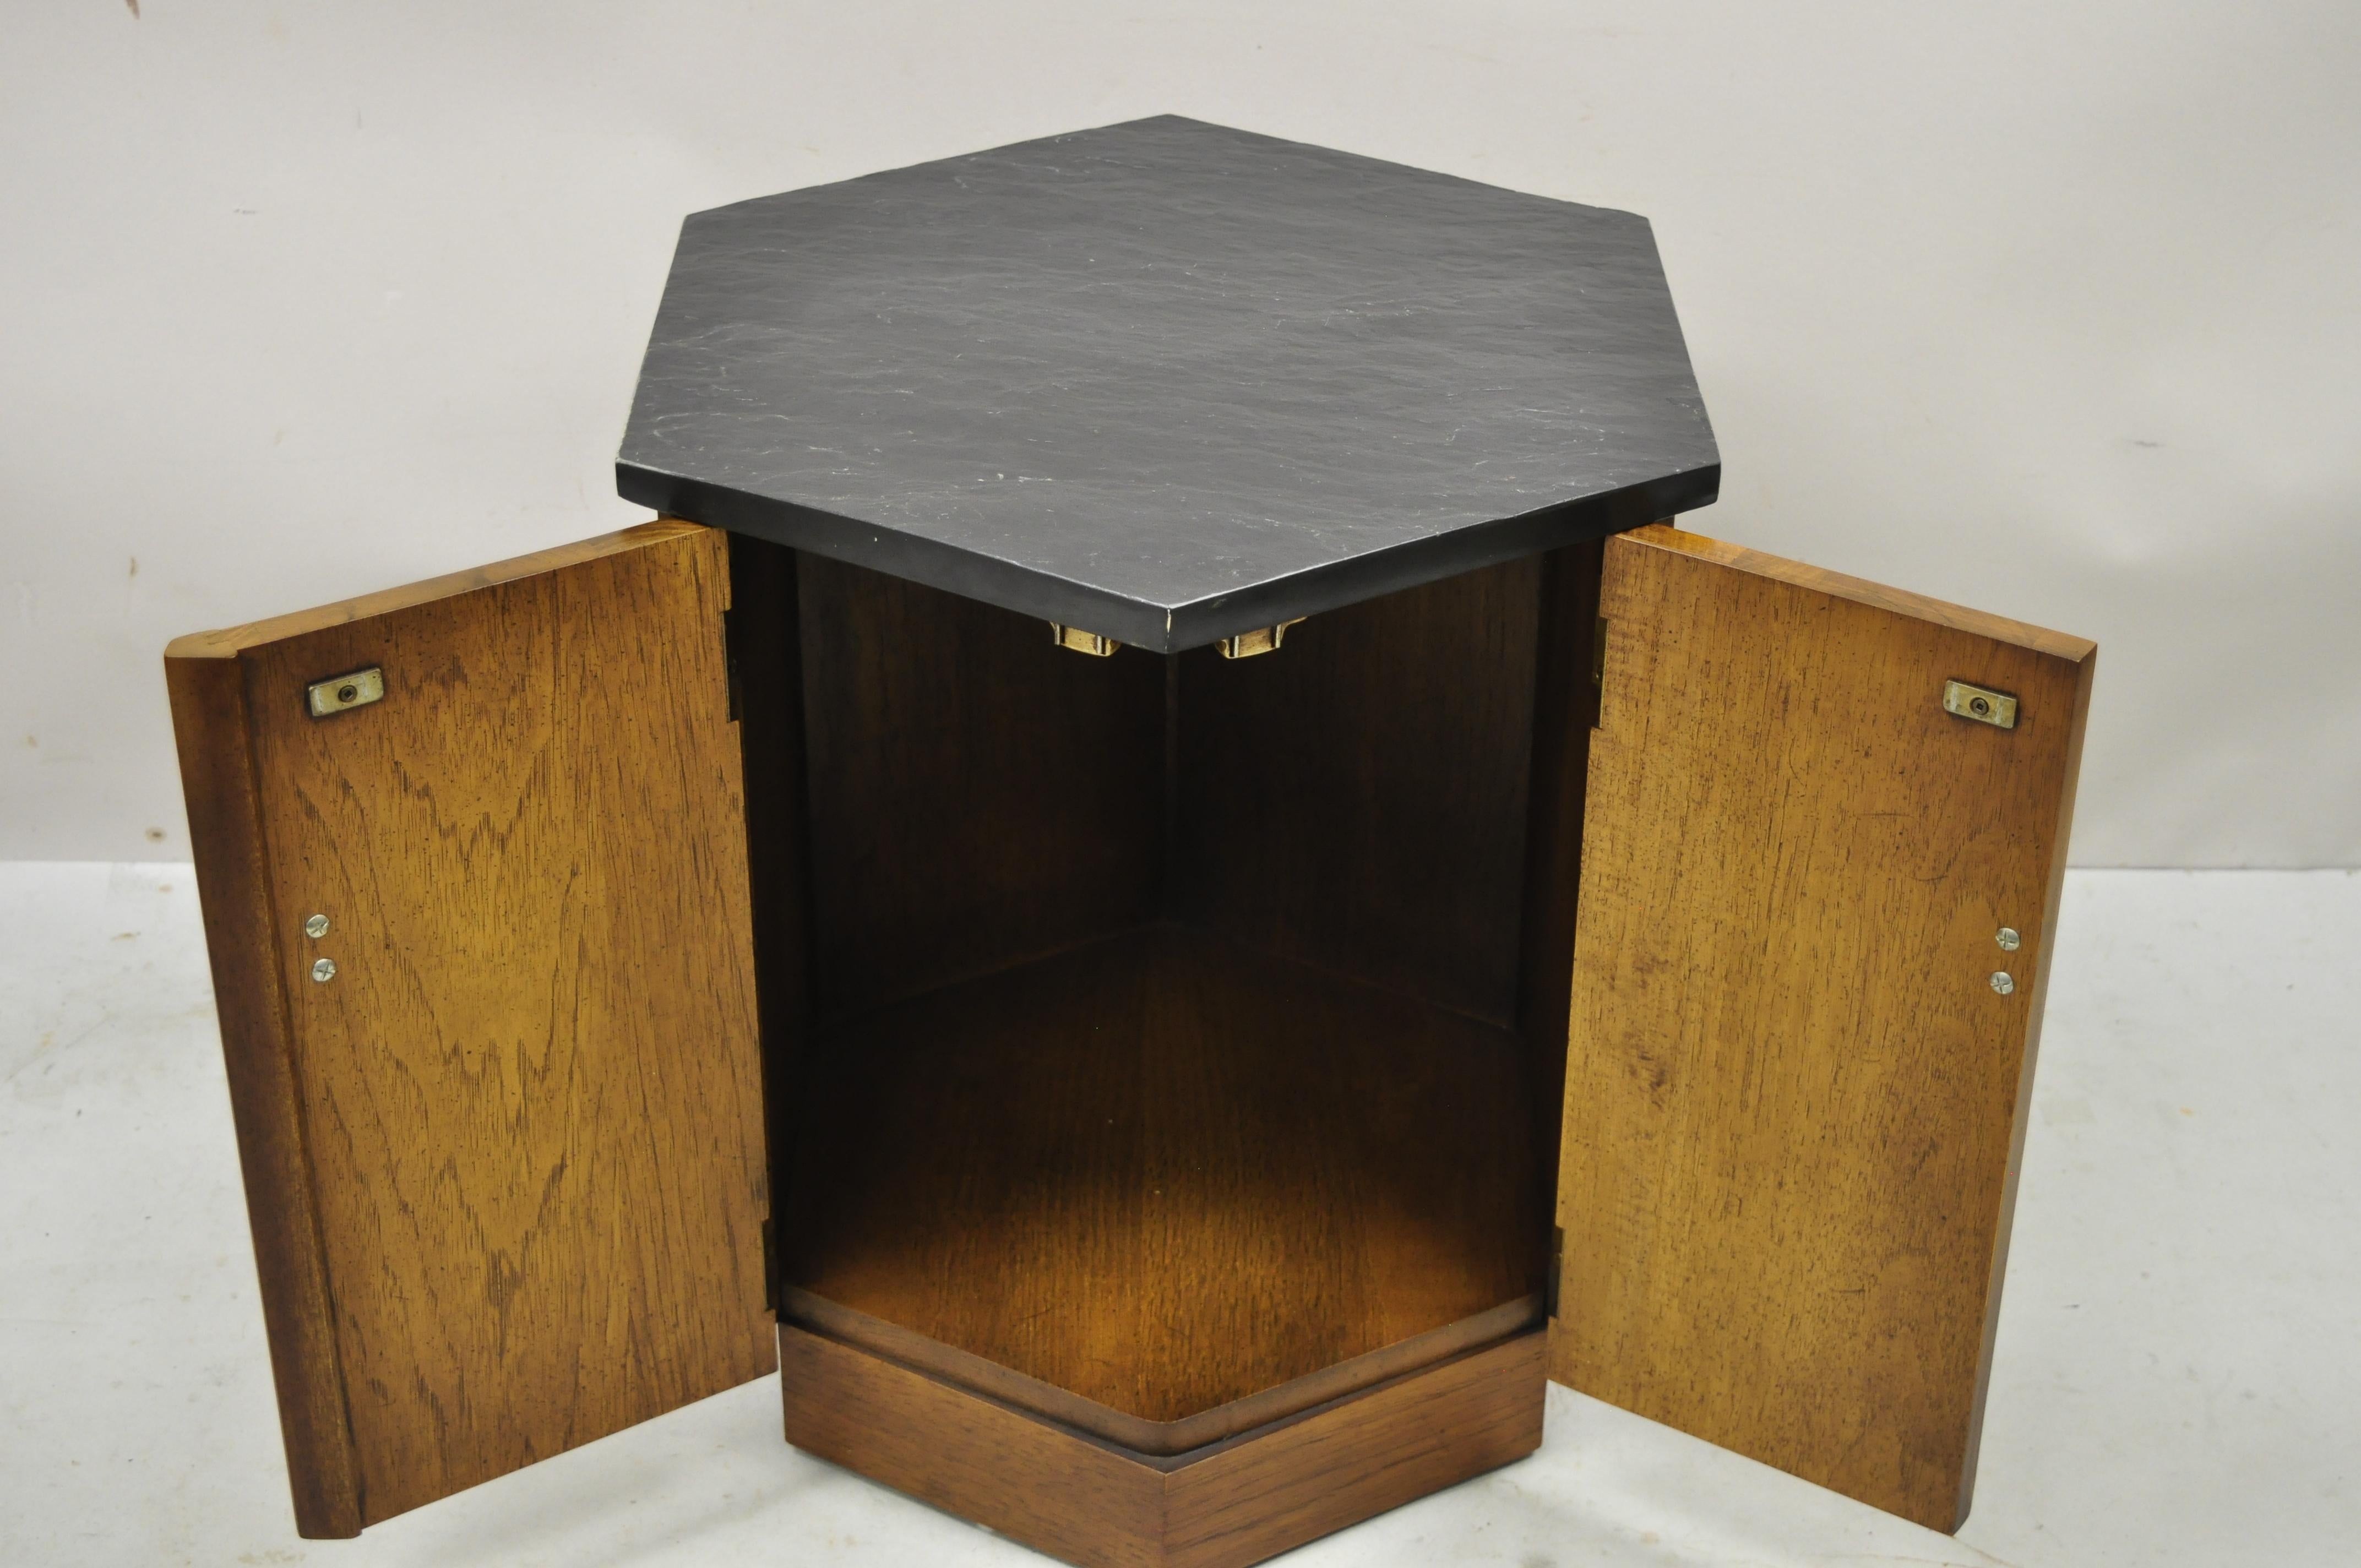 Mid-Century Modern walnut Hexagonal slate top side cabinet drum table. Item features hexagonal slate top, beautiful wood grain, finished back, 2 swing doors, very nice vintage item, great style and form. Circa mid 20th century. Measurements: 21